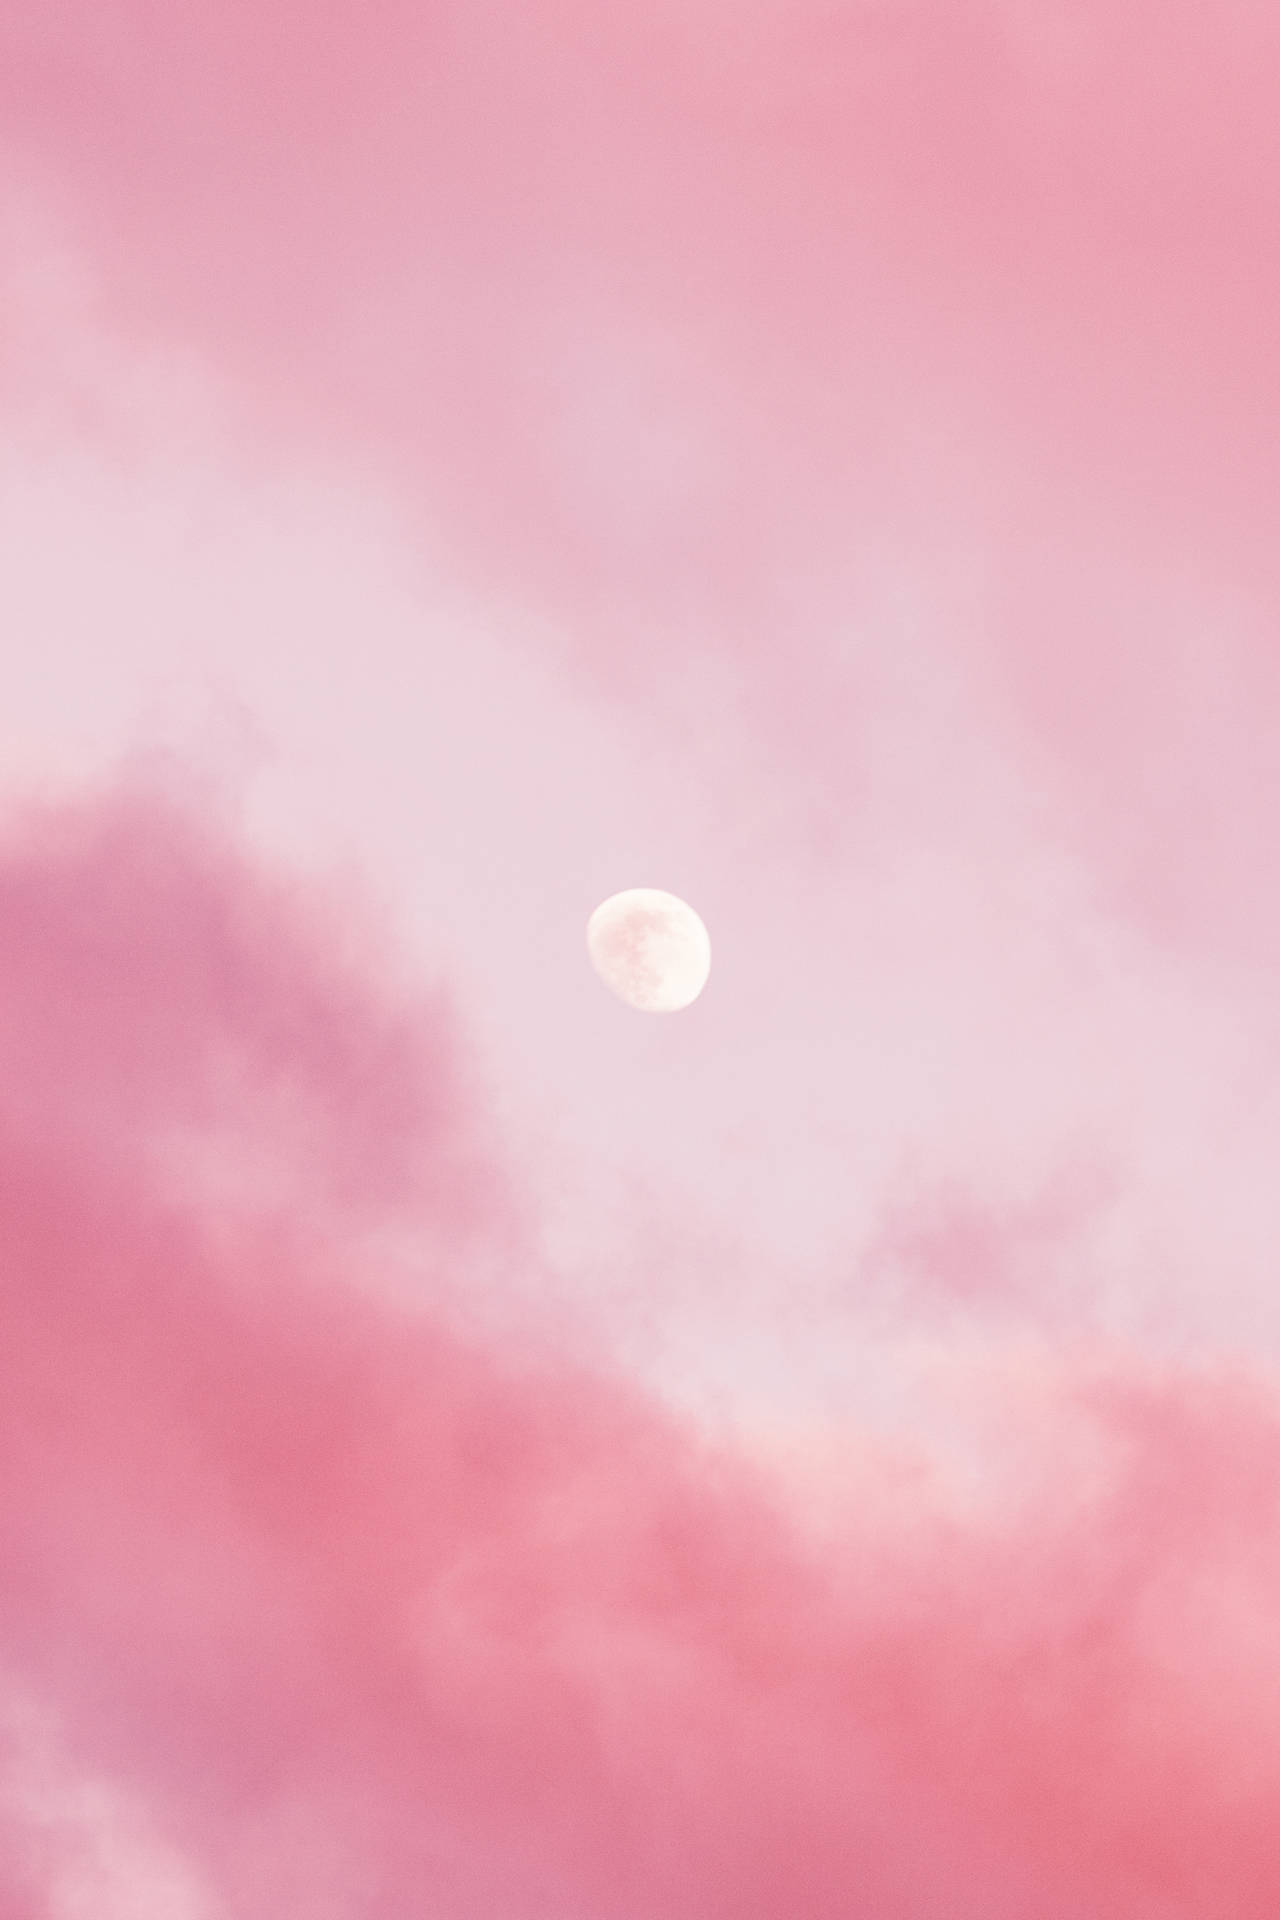 Pink Aesthetic 2610X3916 Wallpaper and Background Image